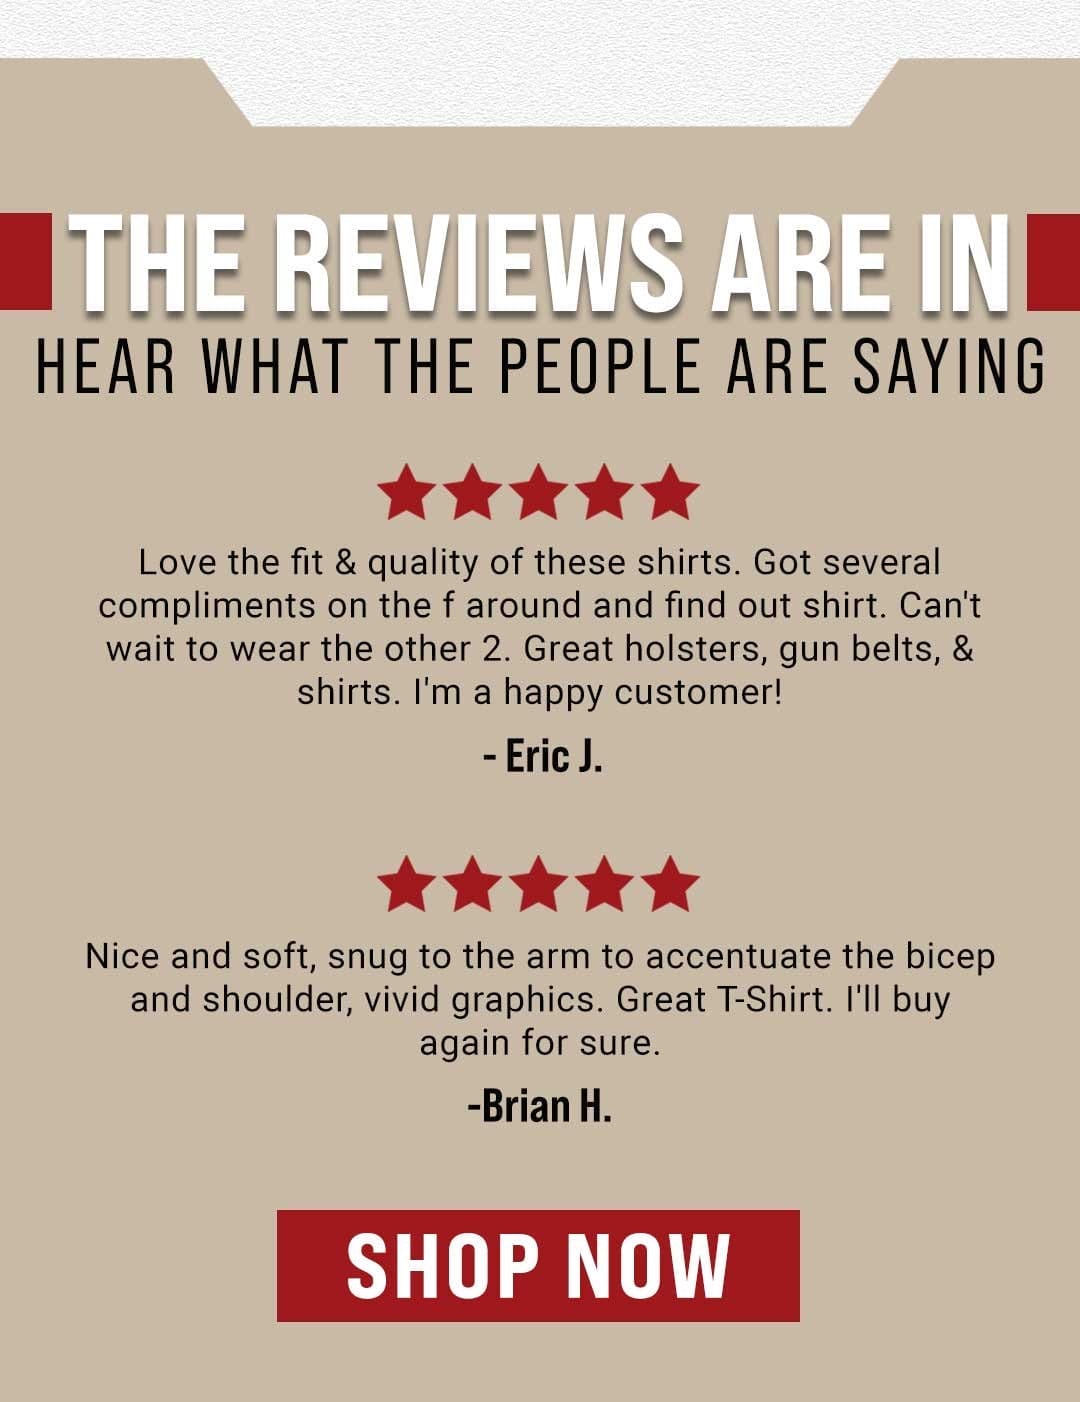 5 Star Quality and Reviews